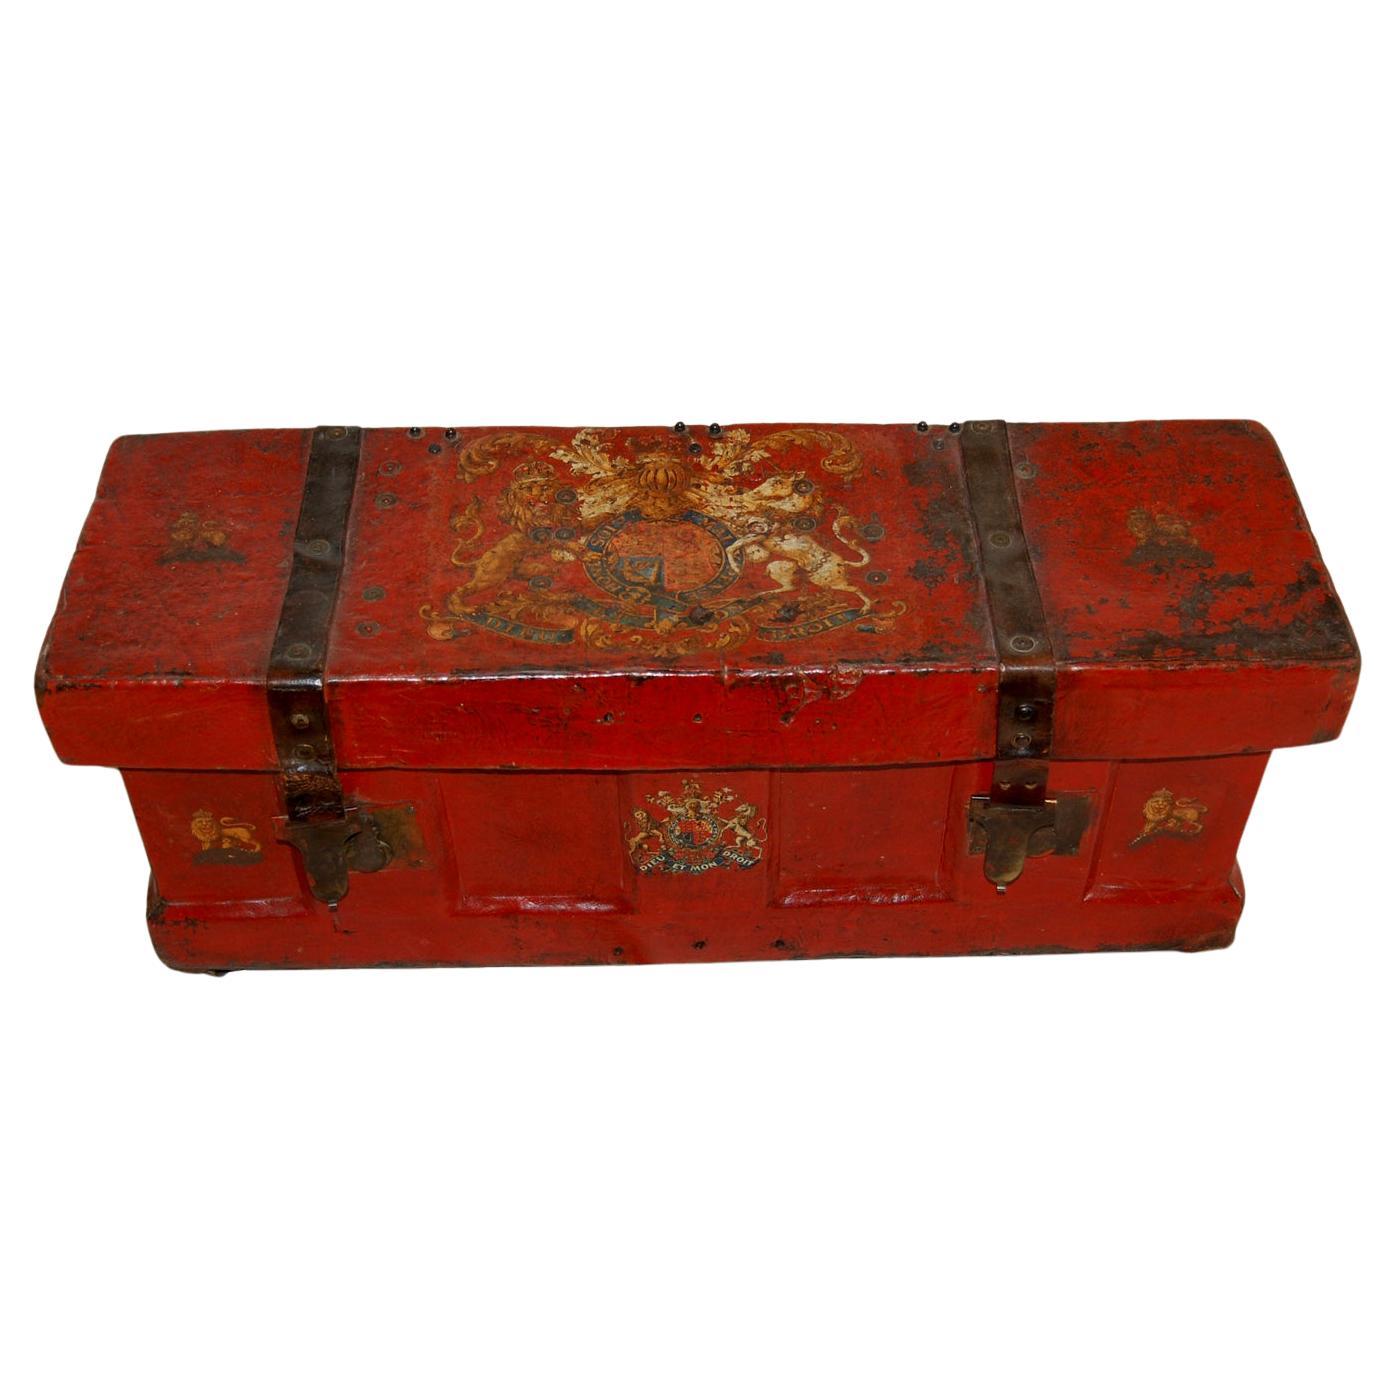 English Mid-19th Century Military Munitions Box with Royal Mottos, Coat of Arms